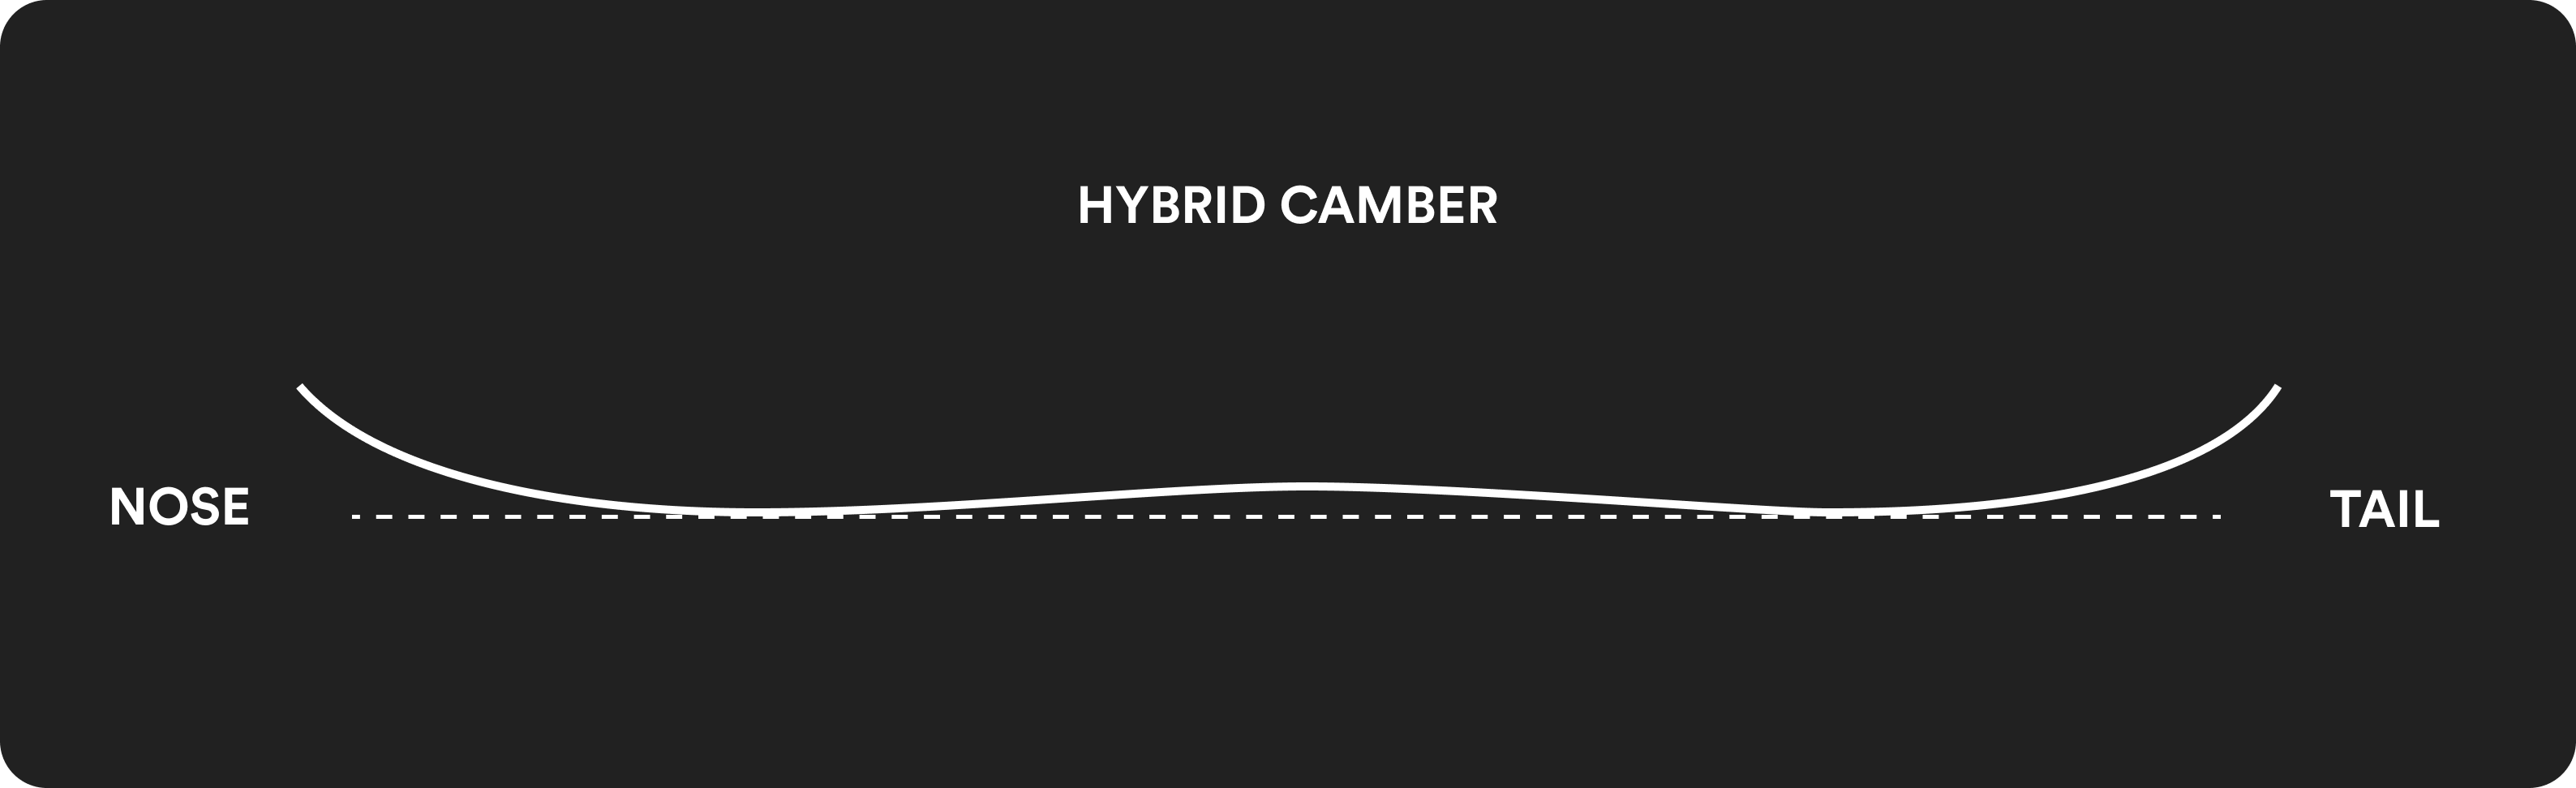 A graphic showing the profile shape of a hybrid camber board. 